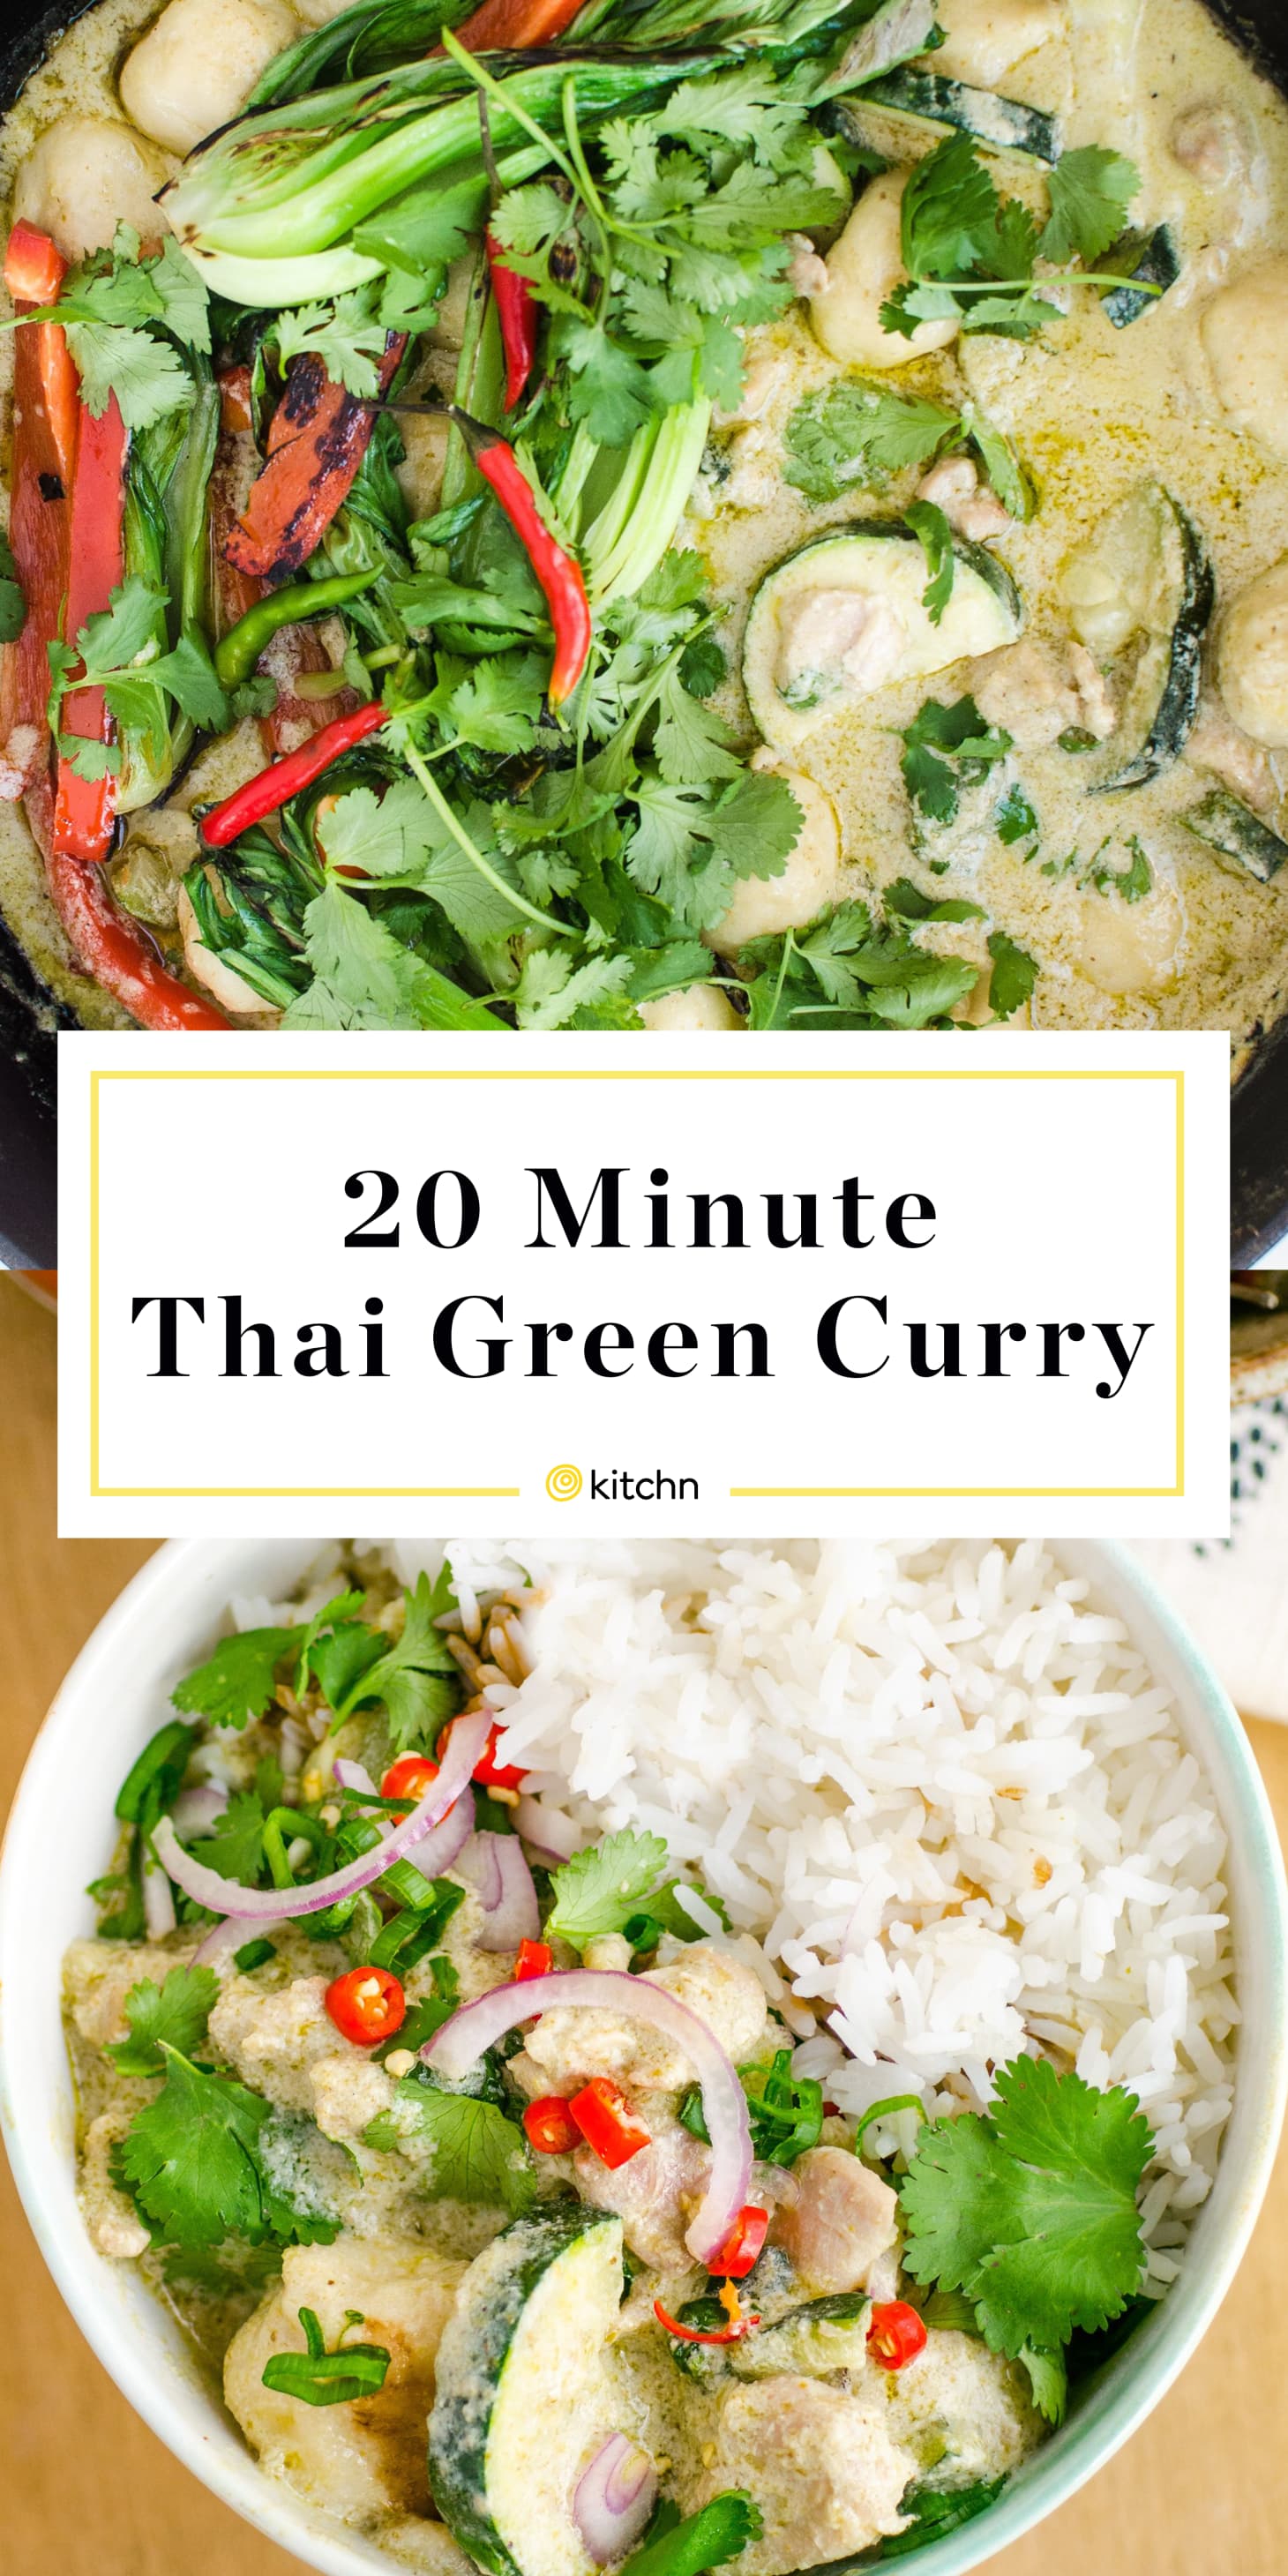 The Easiest Thai Green Curry with Chicken - Recipe | Kitchn